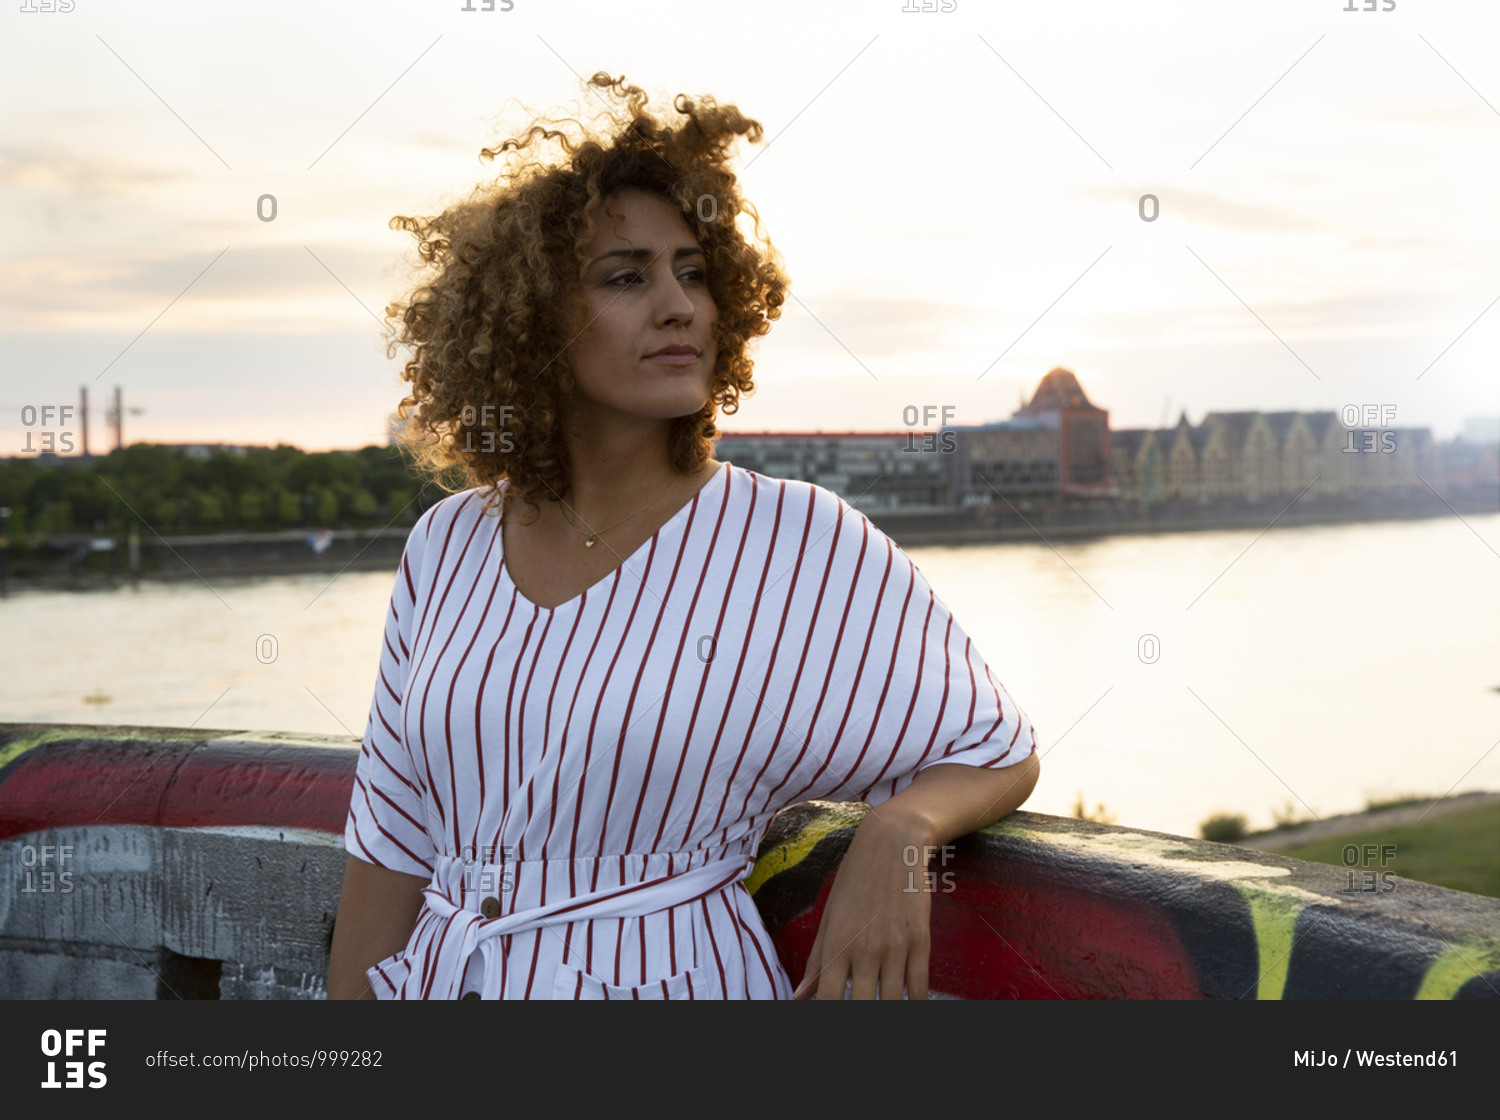 Thoughtful woman with curly hair standing by railing against river in city during sunset